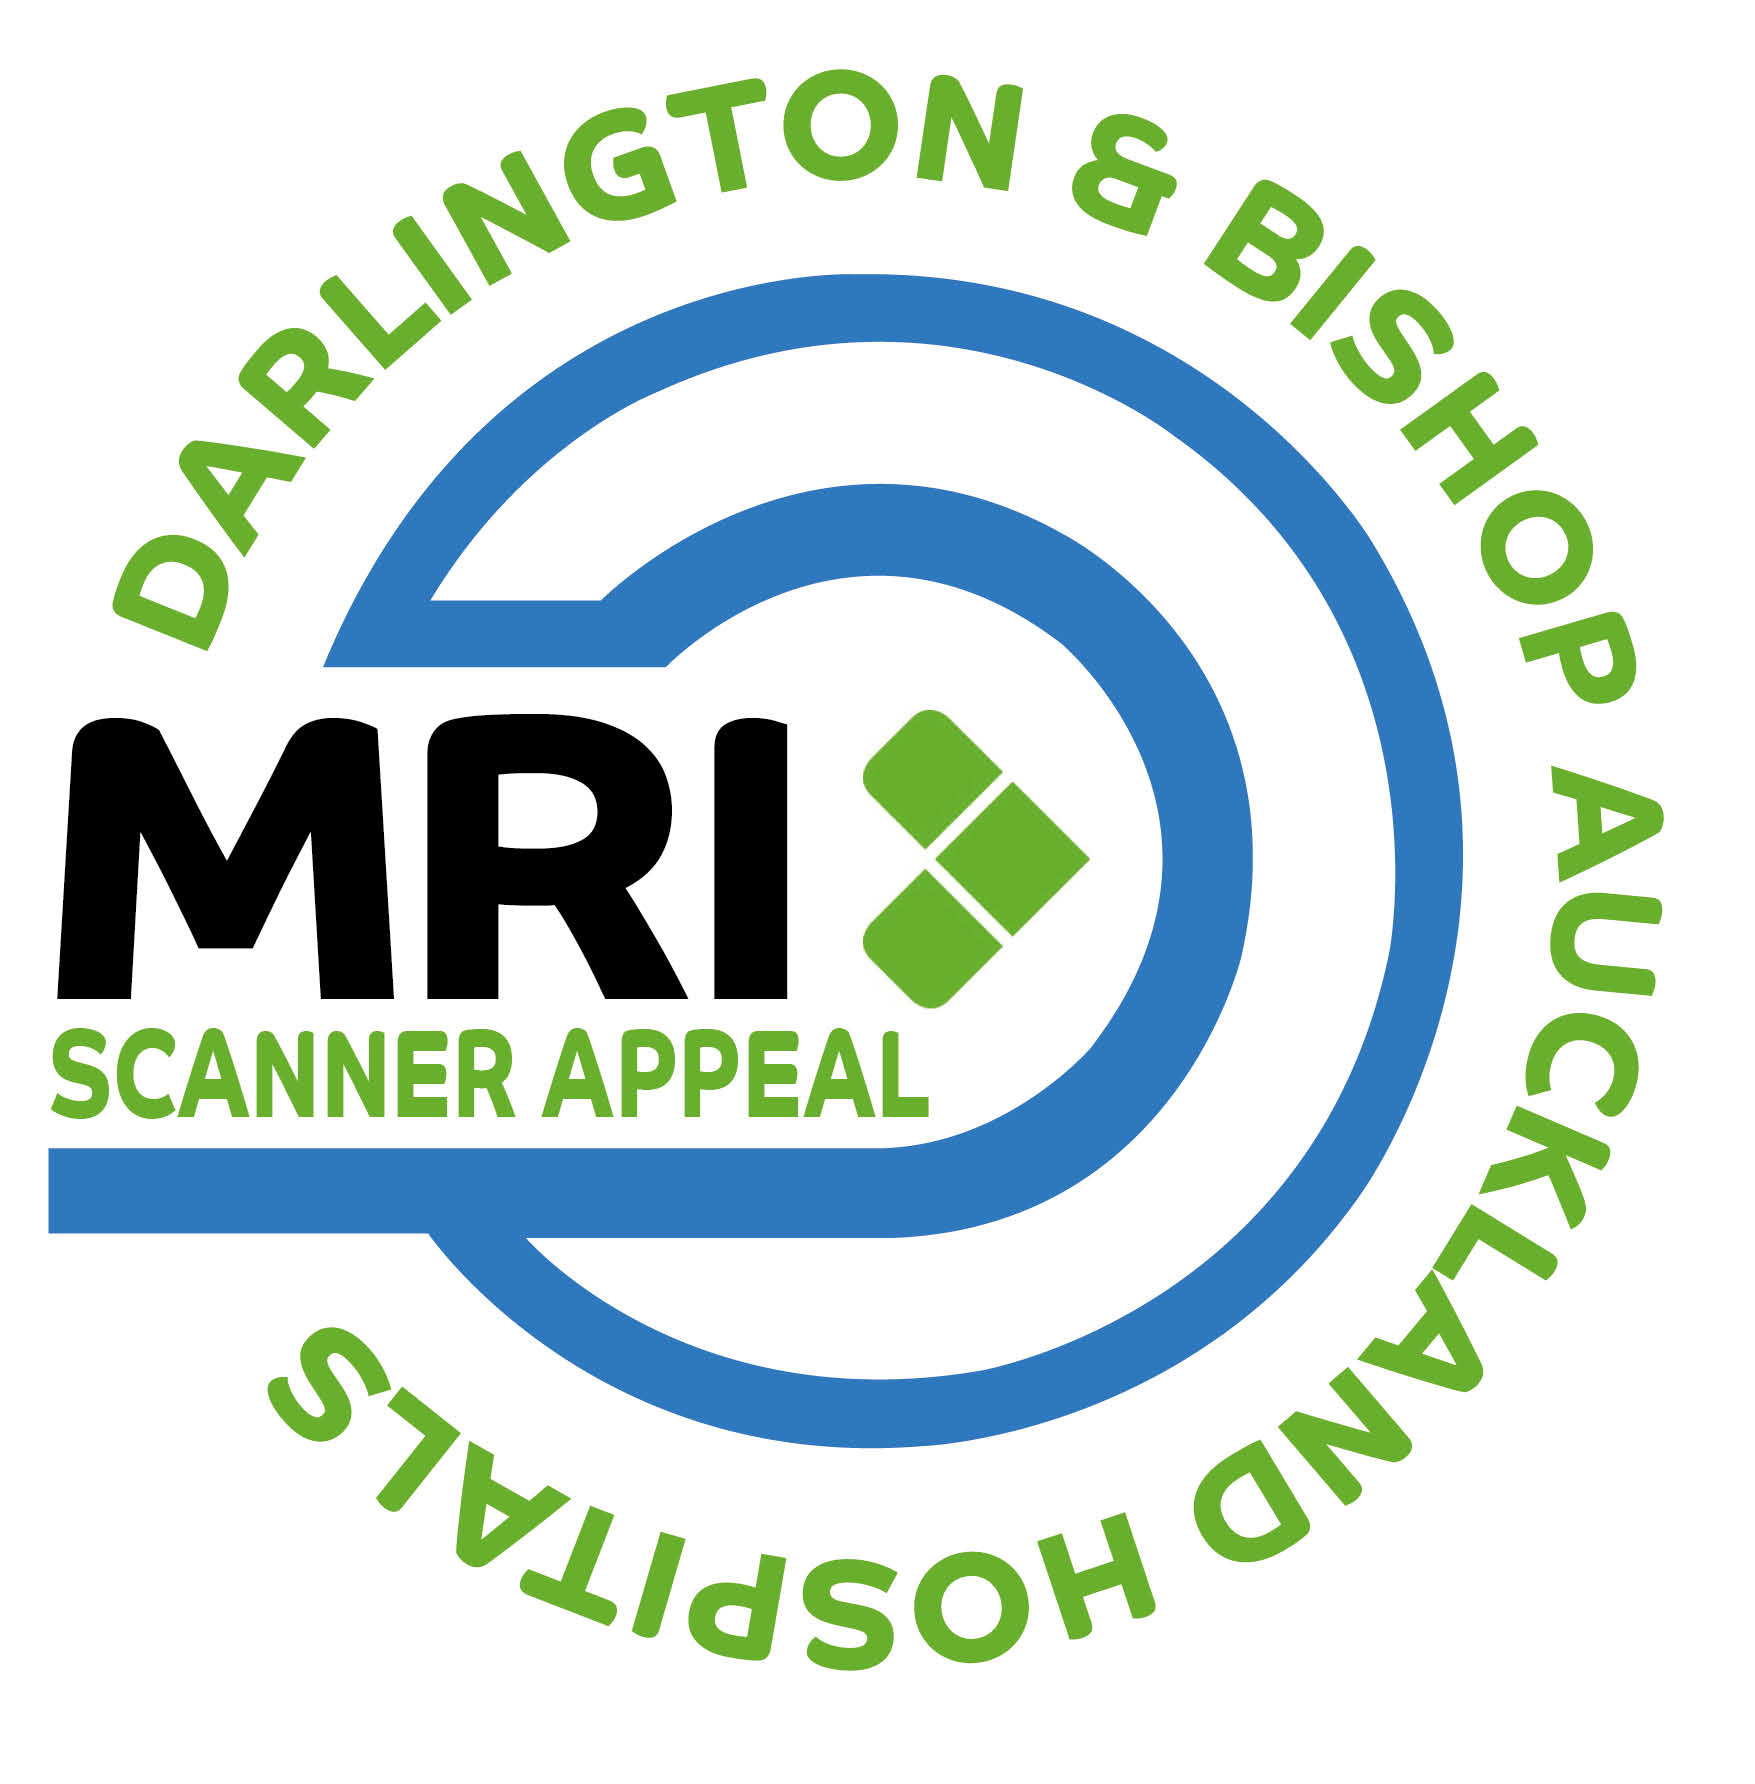 Charity Concert for MRI Scanner Appeal